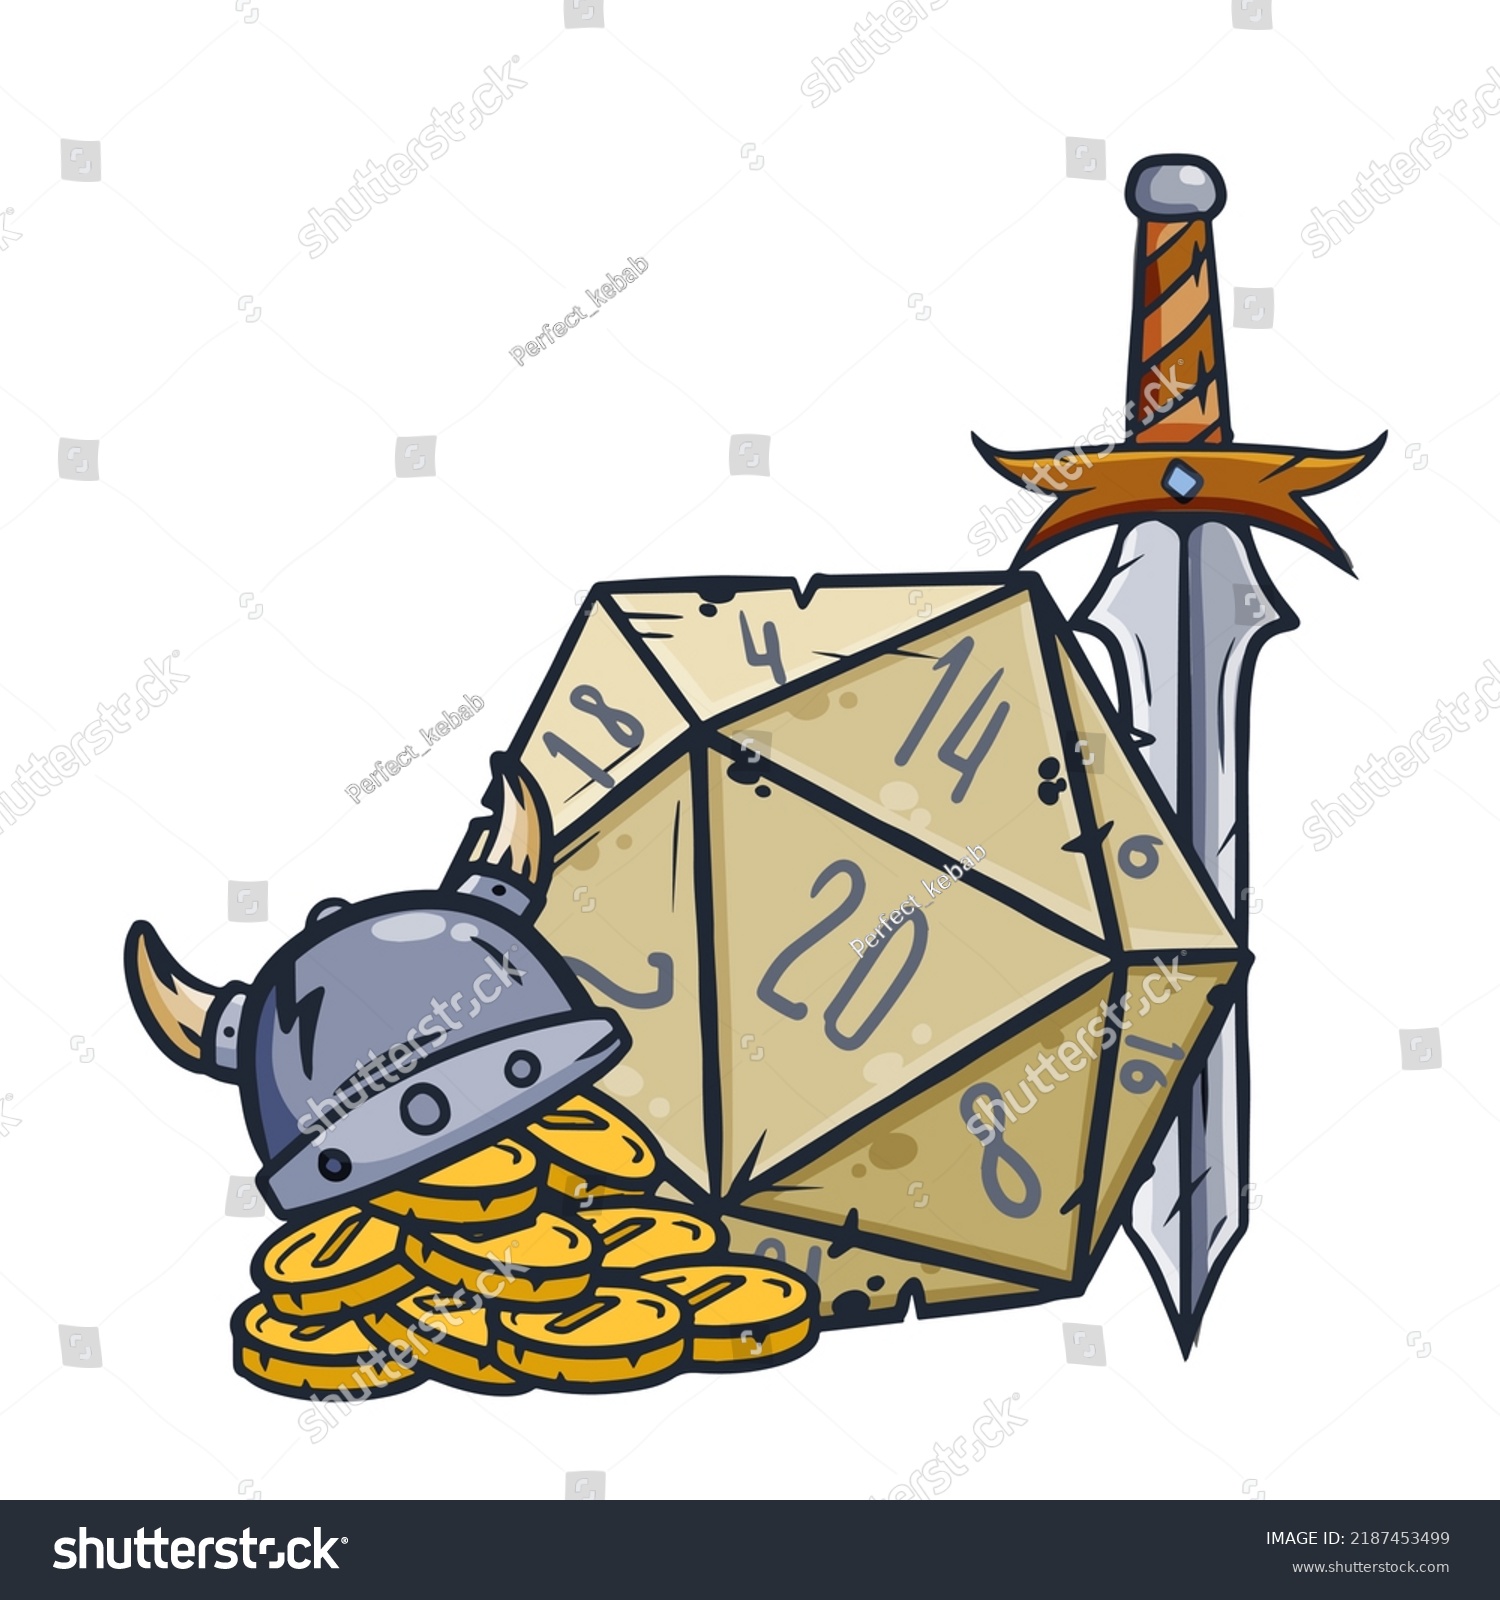 SVG of Dice d20 for playing Dnd. Dungeon and dragons board game. Treasures, paladin sword with gold coins. Cartoon outline drawn illustration svg